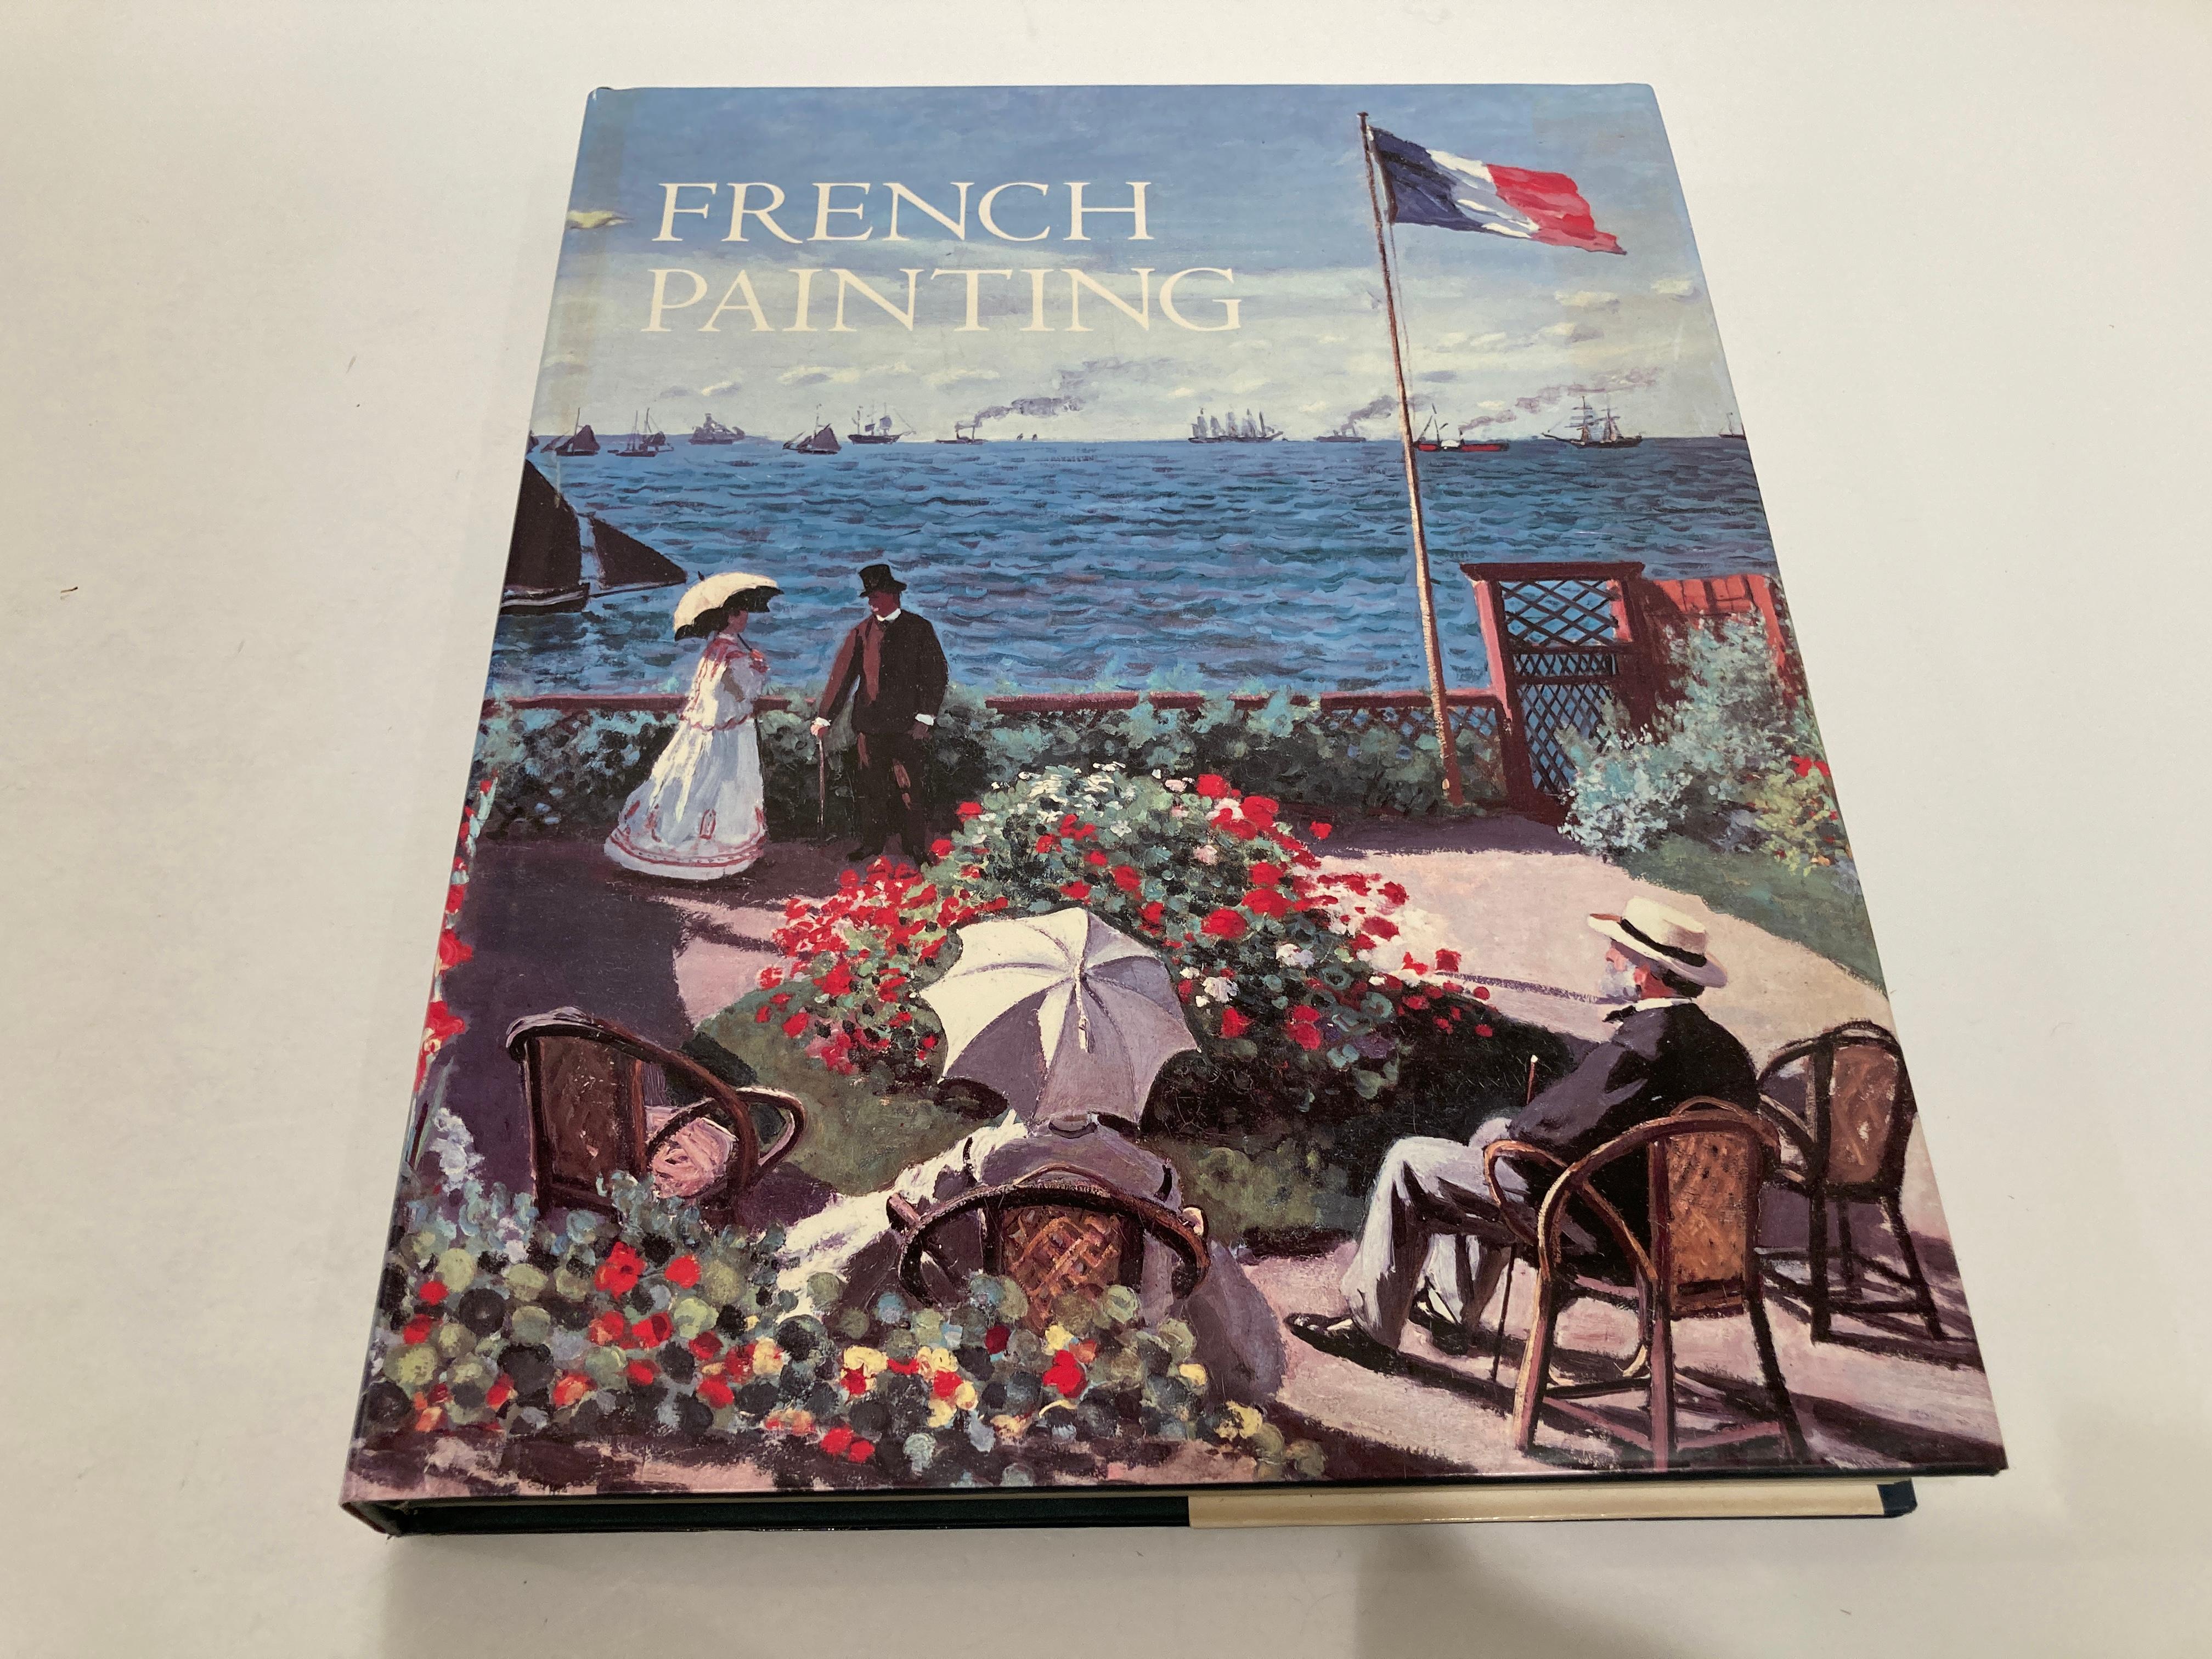 French Painting Hardcover collectible art book by Charles Stuckey– January 1, 1997
by Charles Stuckey (Author)
Hardcover · 320 page
Stuckey examines French art on a continuum, from the prehistoric Lascaux cave paintings of potent bulls and horses